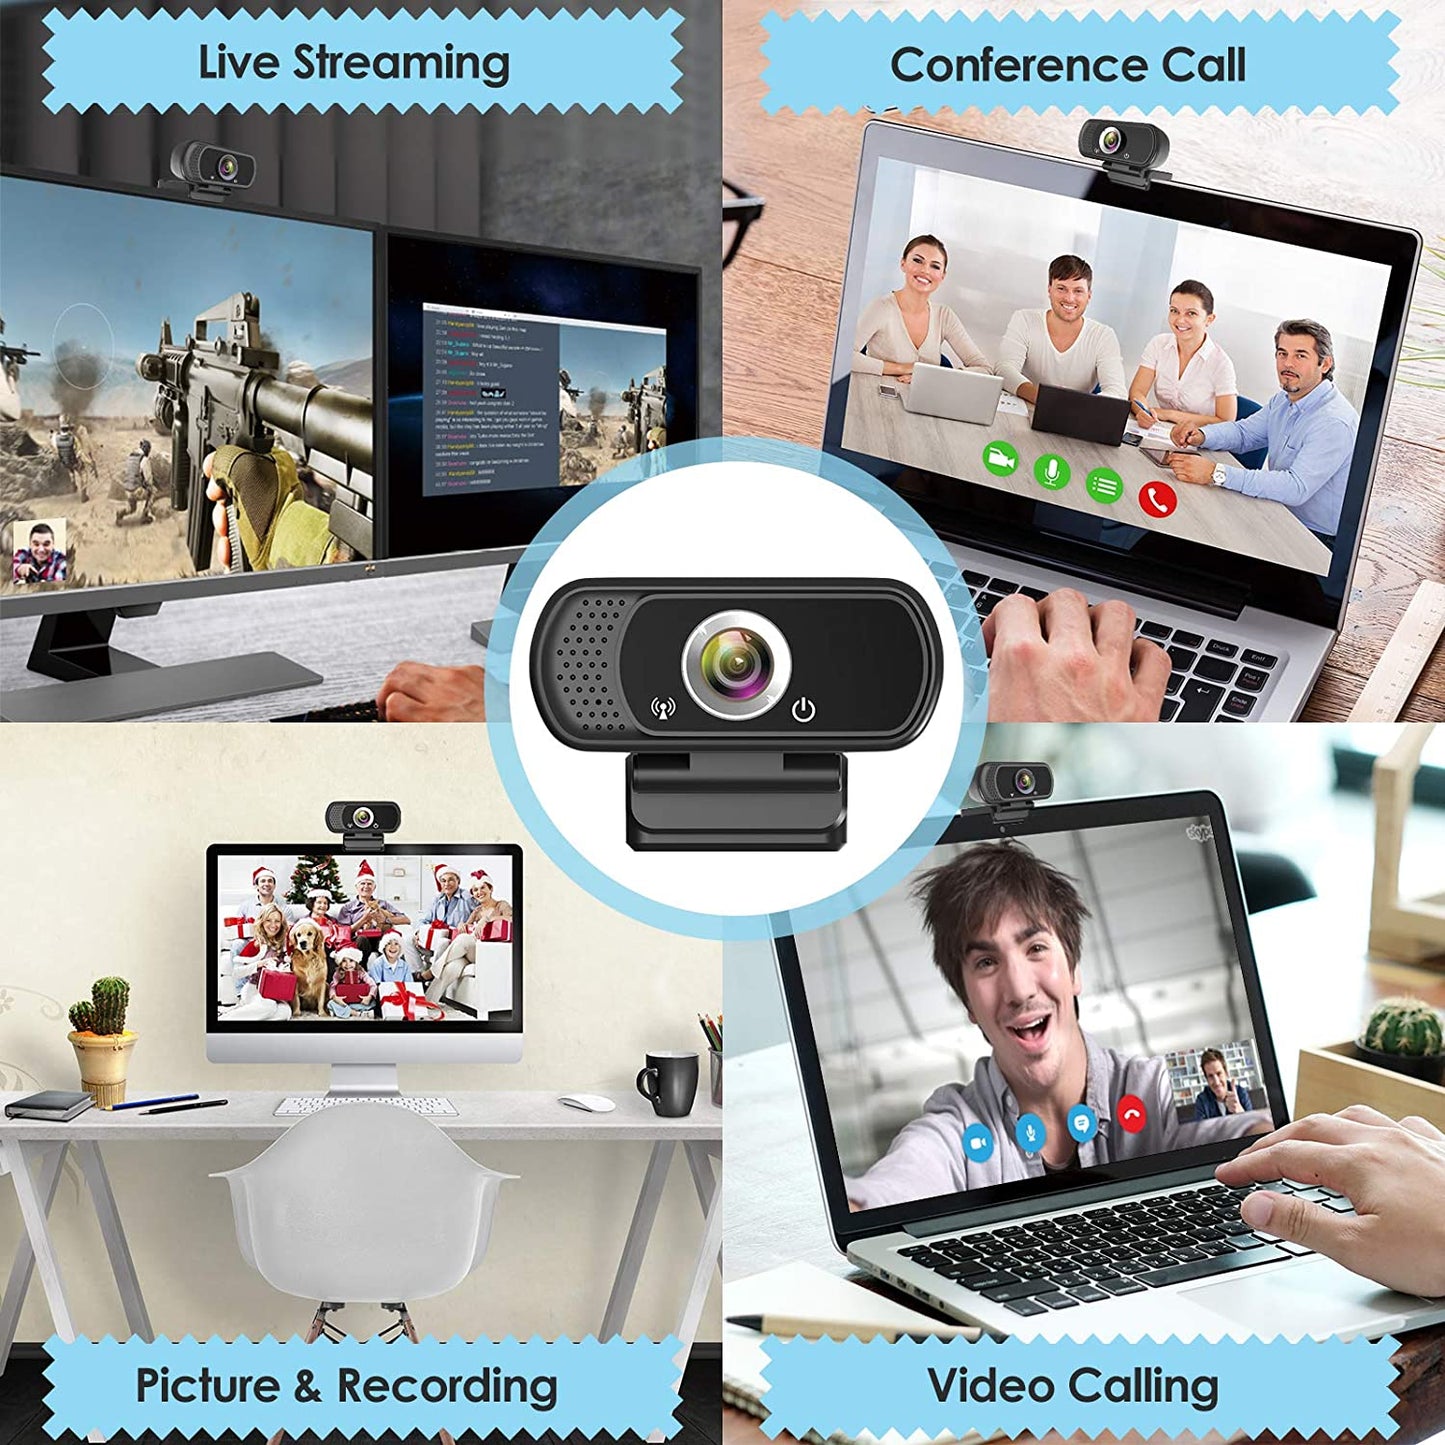 Webcam HD 1080p Web Camera, USB PC Computer with Microphone, Laptop...